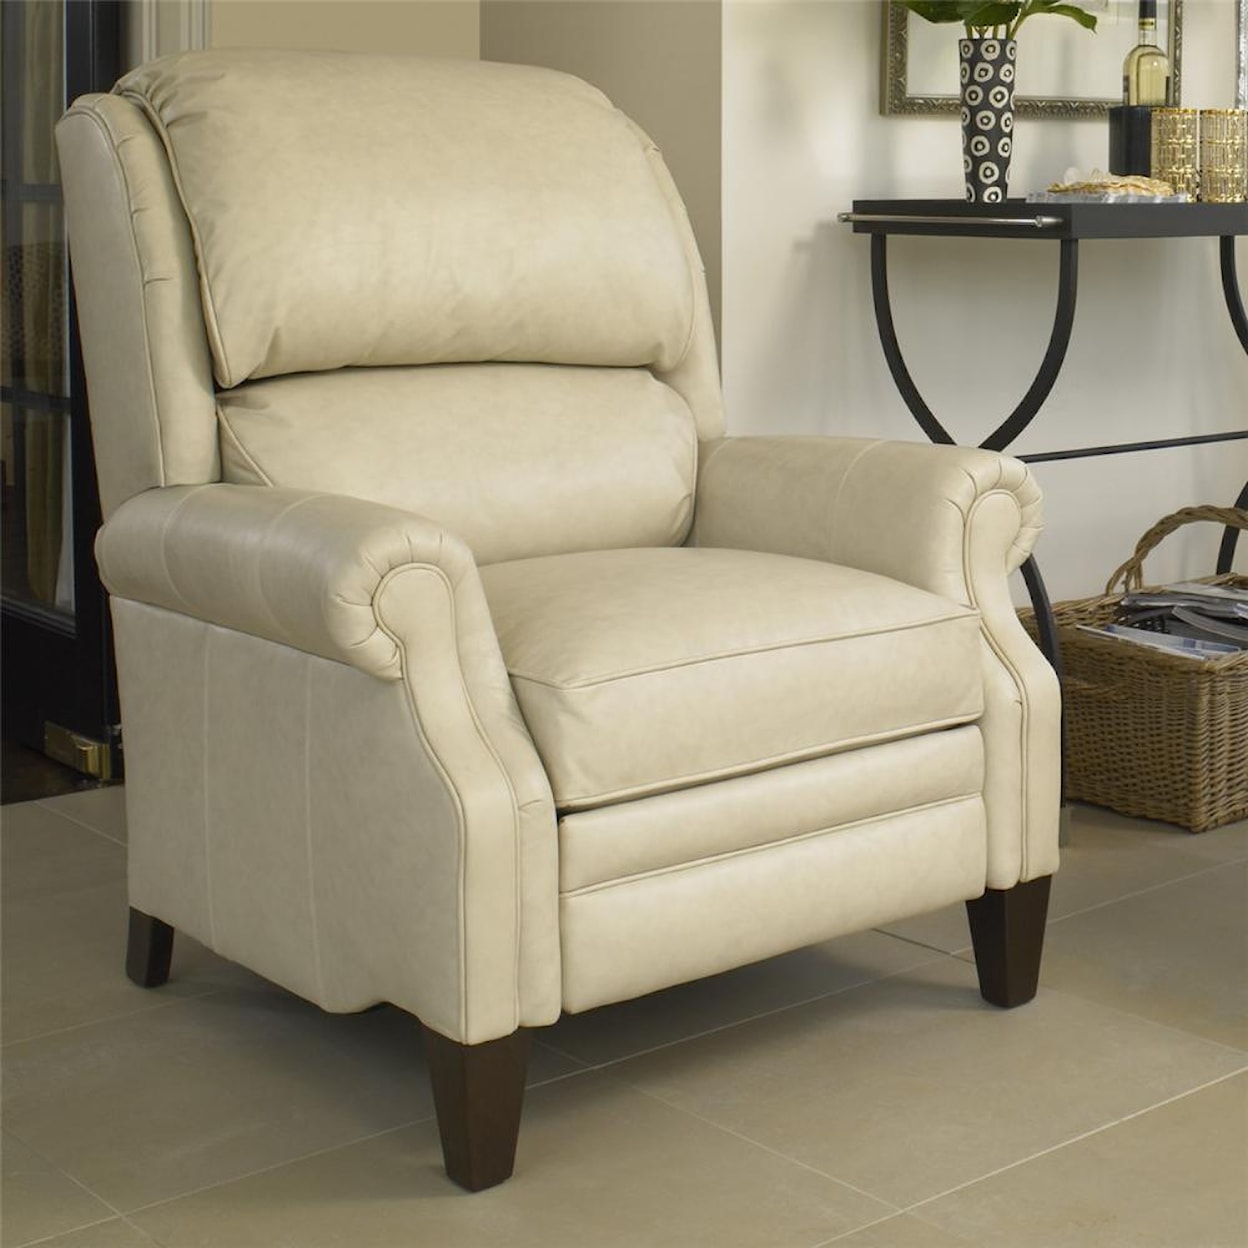 Smith Brothers Recliners  Recliner